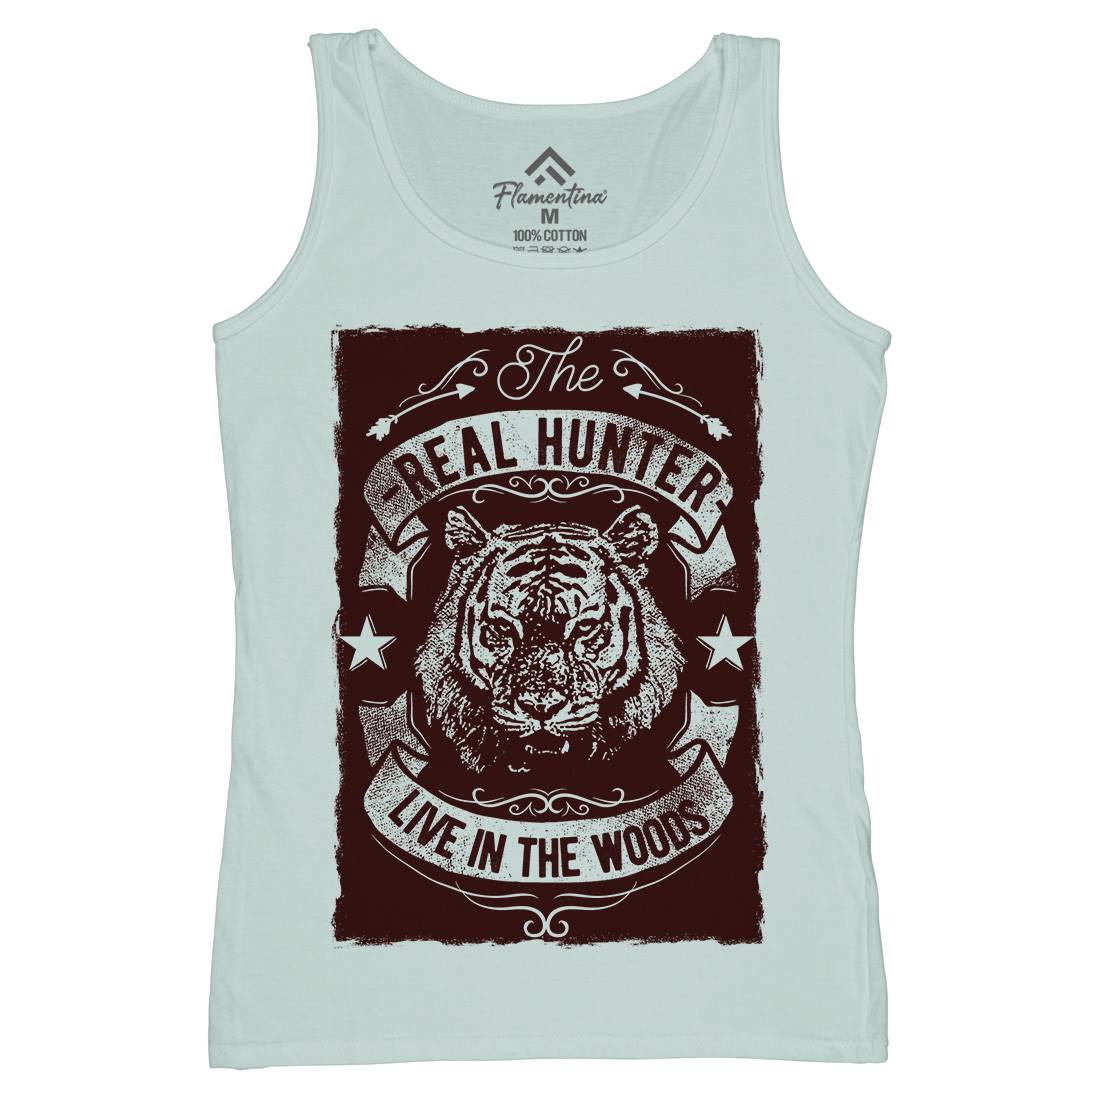 The Real Hunter Live In The Woods Womens Organic Tank Top Vest Nature C989